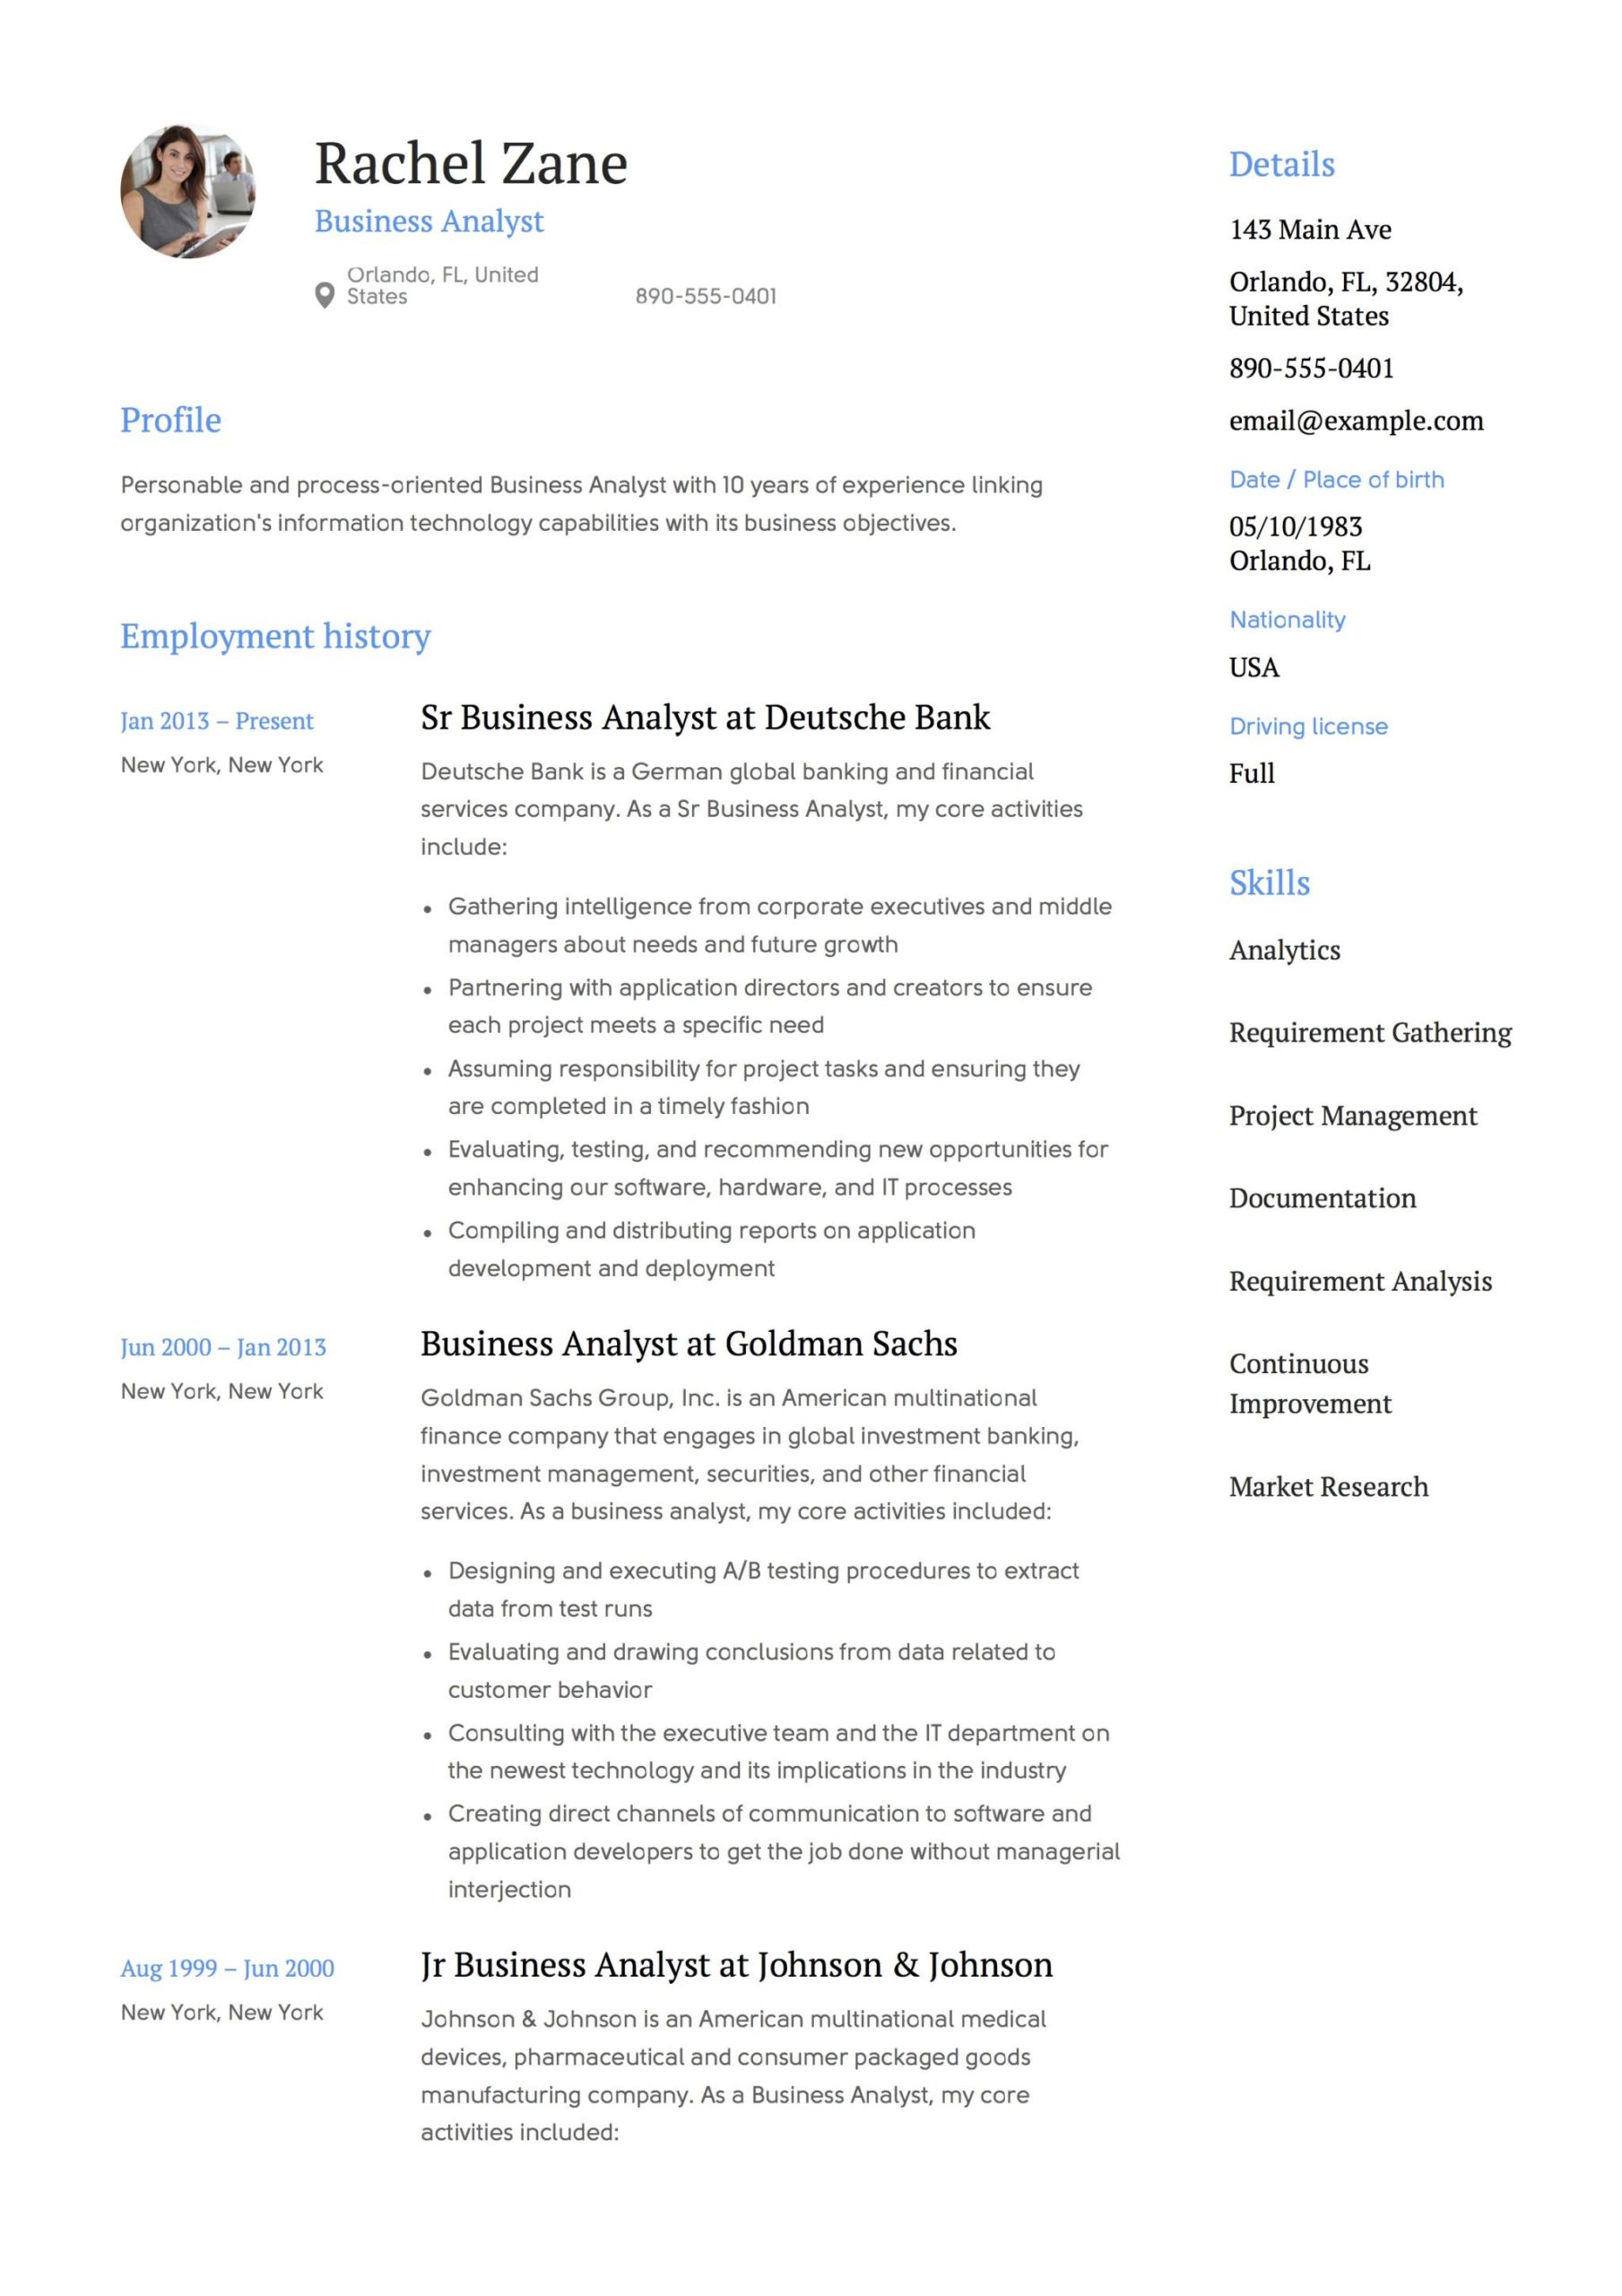 Functional Resume Sample for Business Analyst Business Analyst Resume Examples & Writing Guide 2022